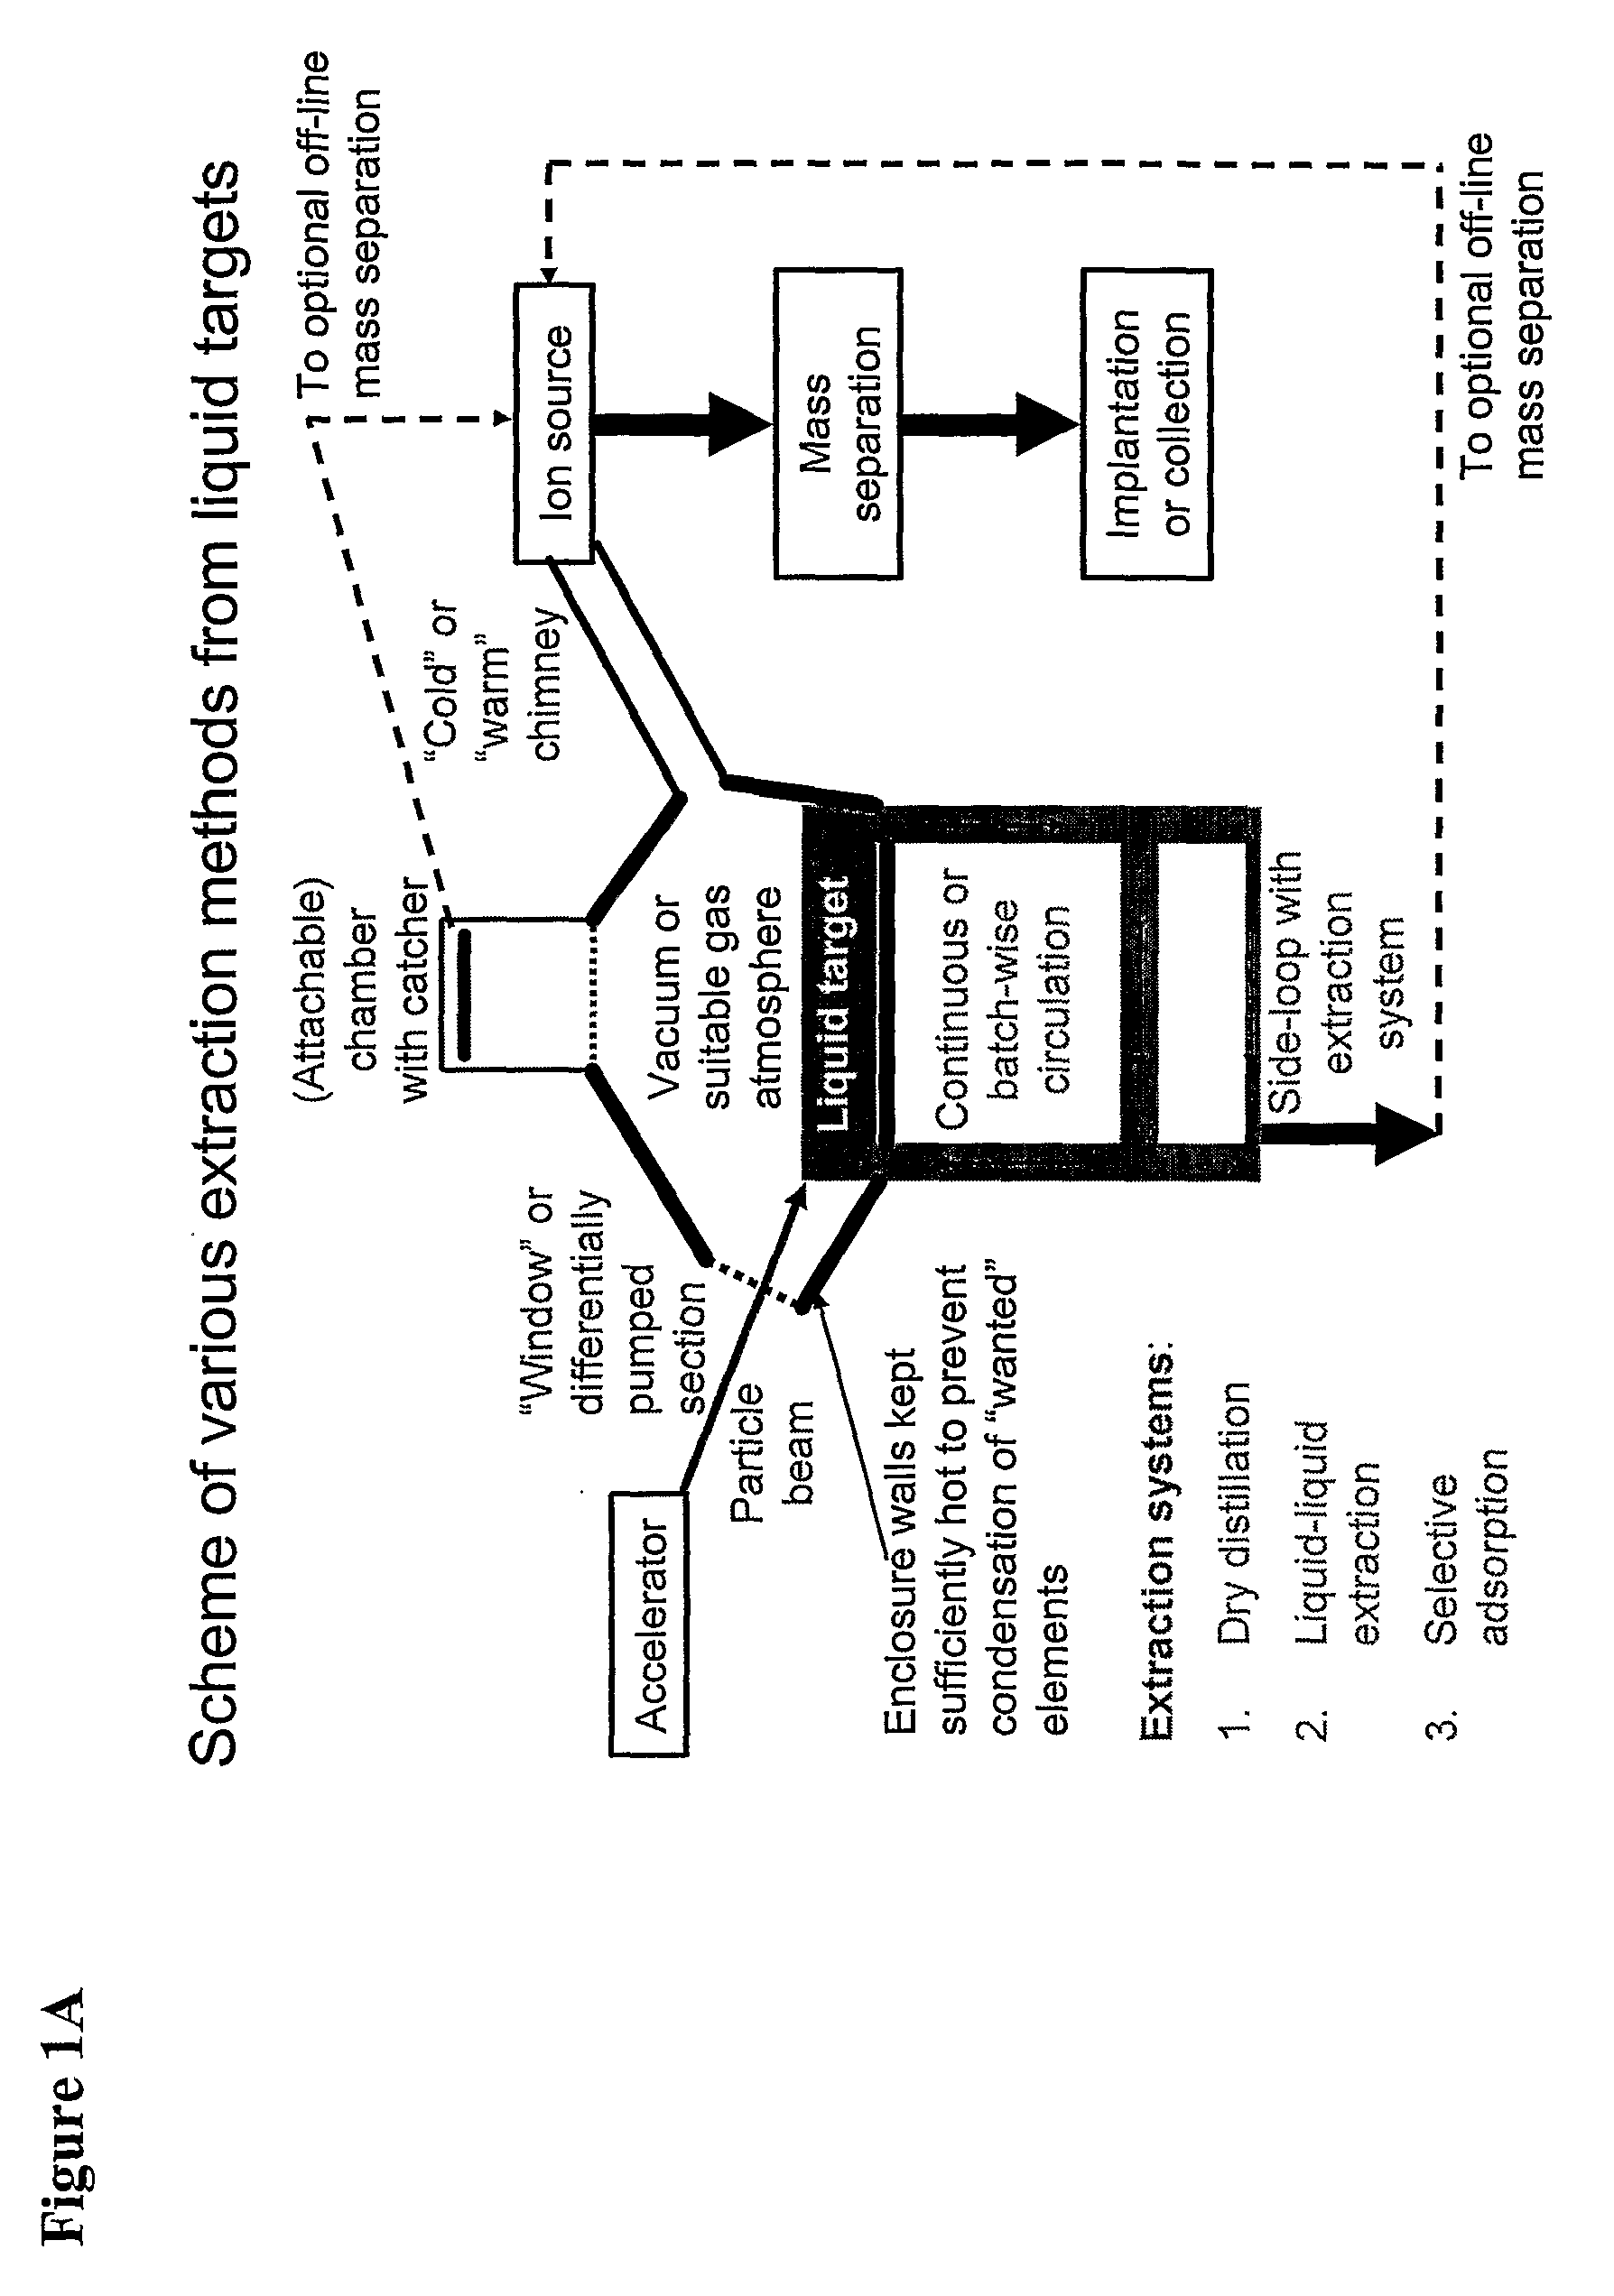 Method for Production of Radioisotope Preparations and Their Use in Life Science, Research, Medical Application and Industry